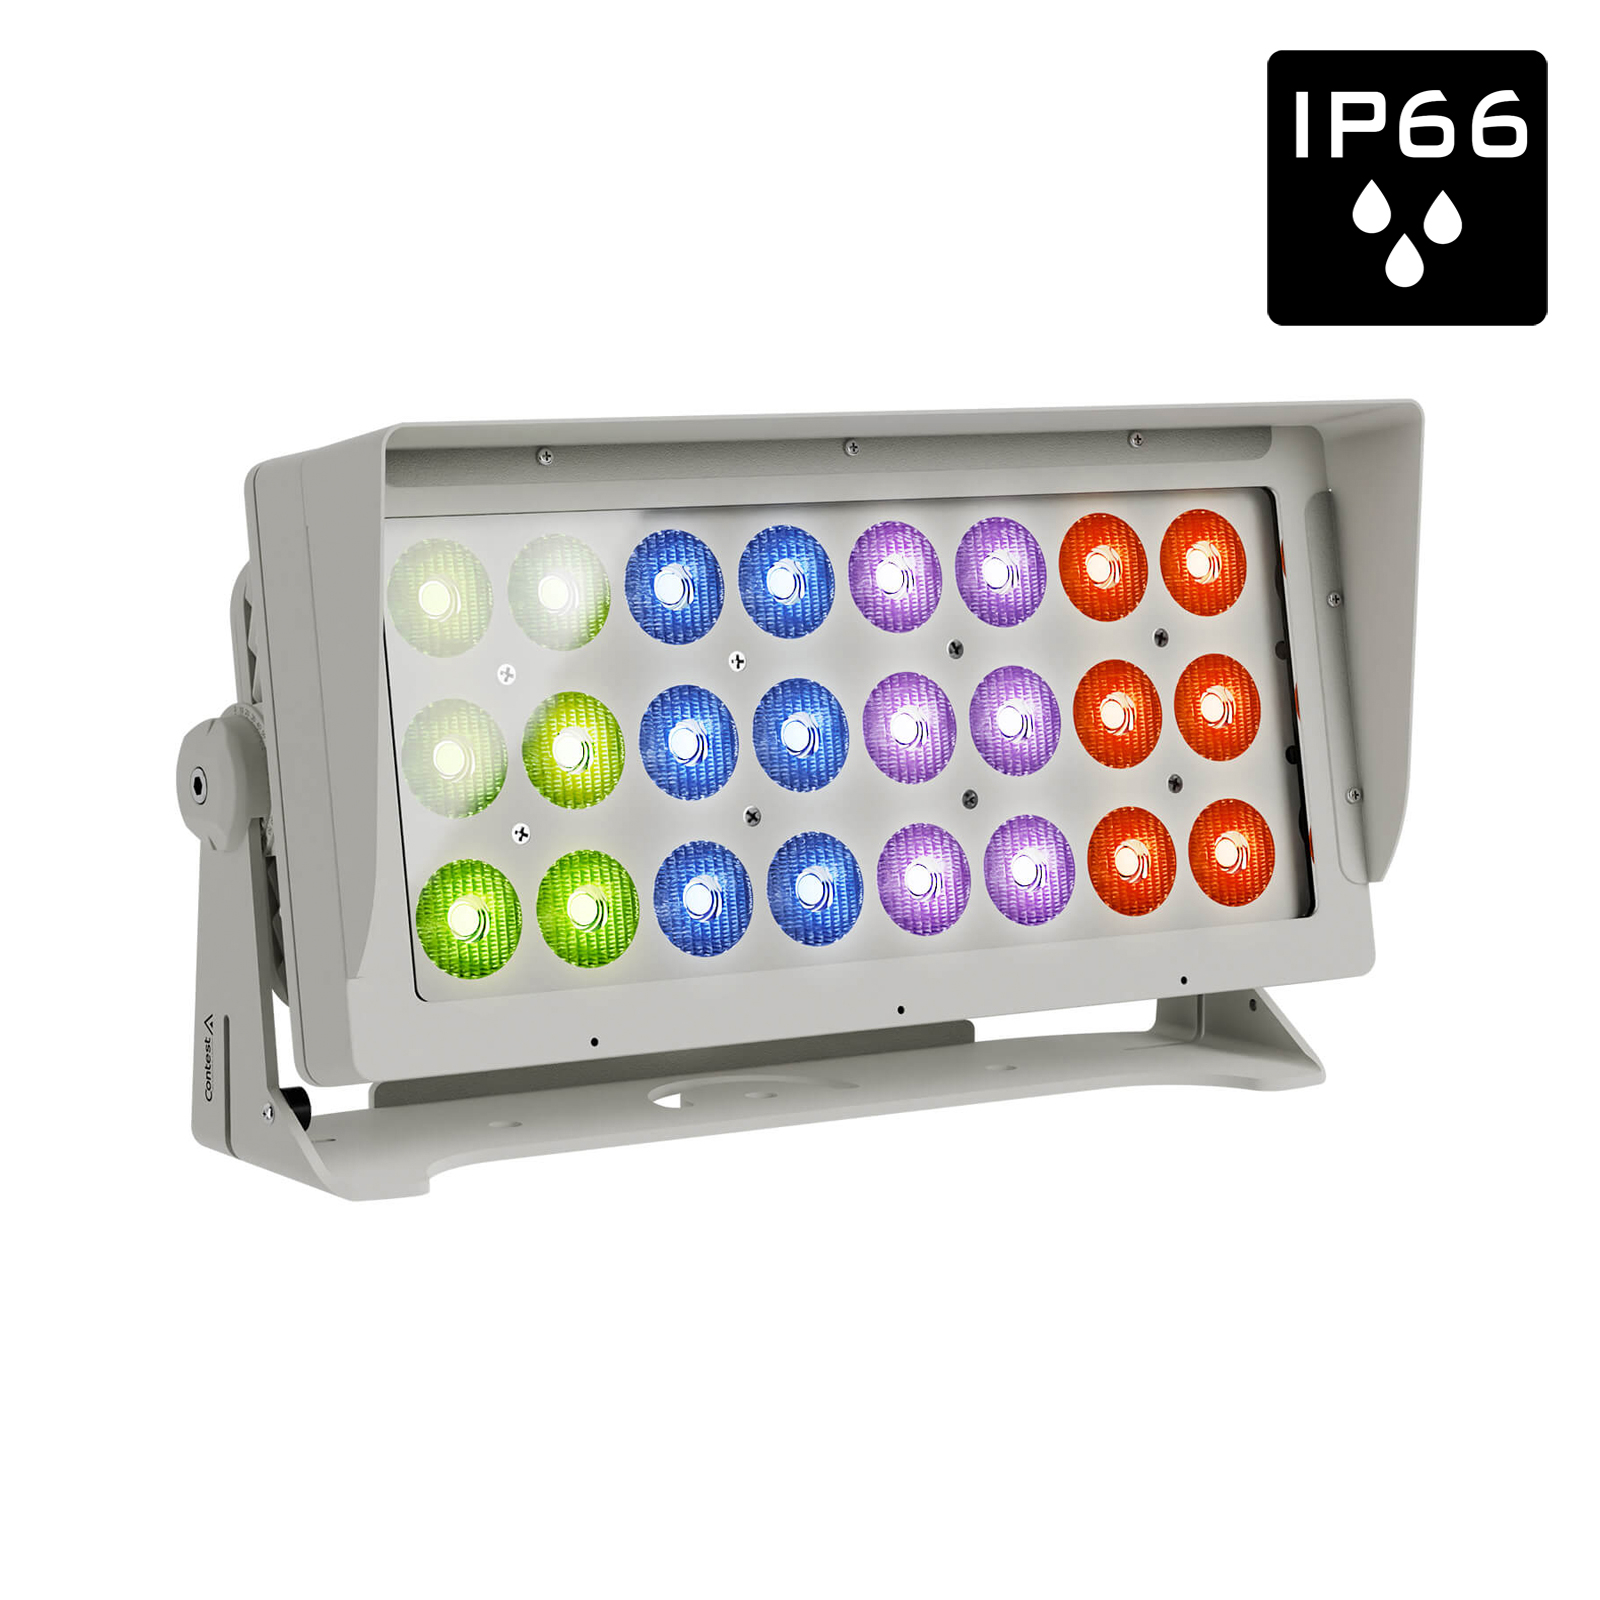 Color architectural projector IP66 - 24 RGBL LED - 200W - 30-